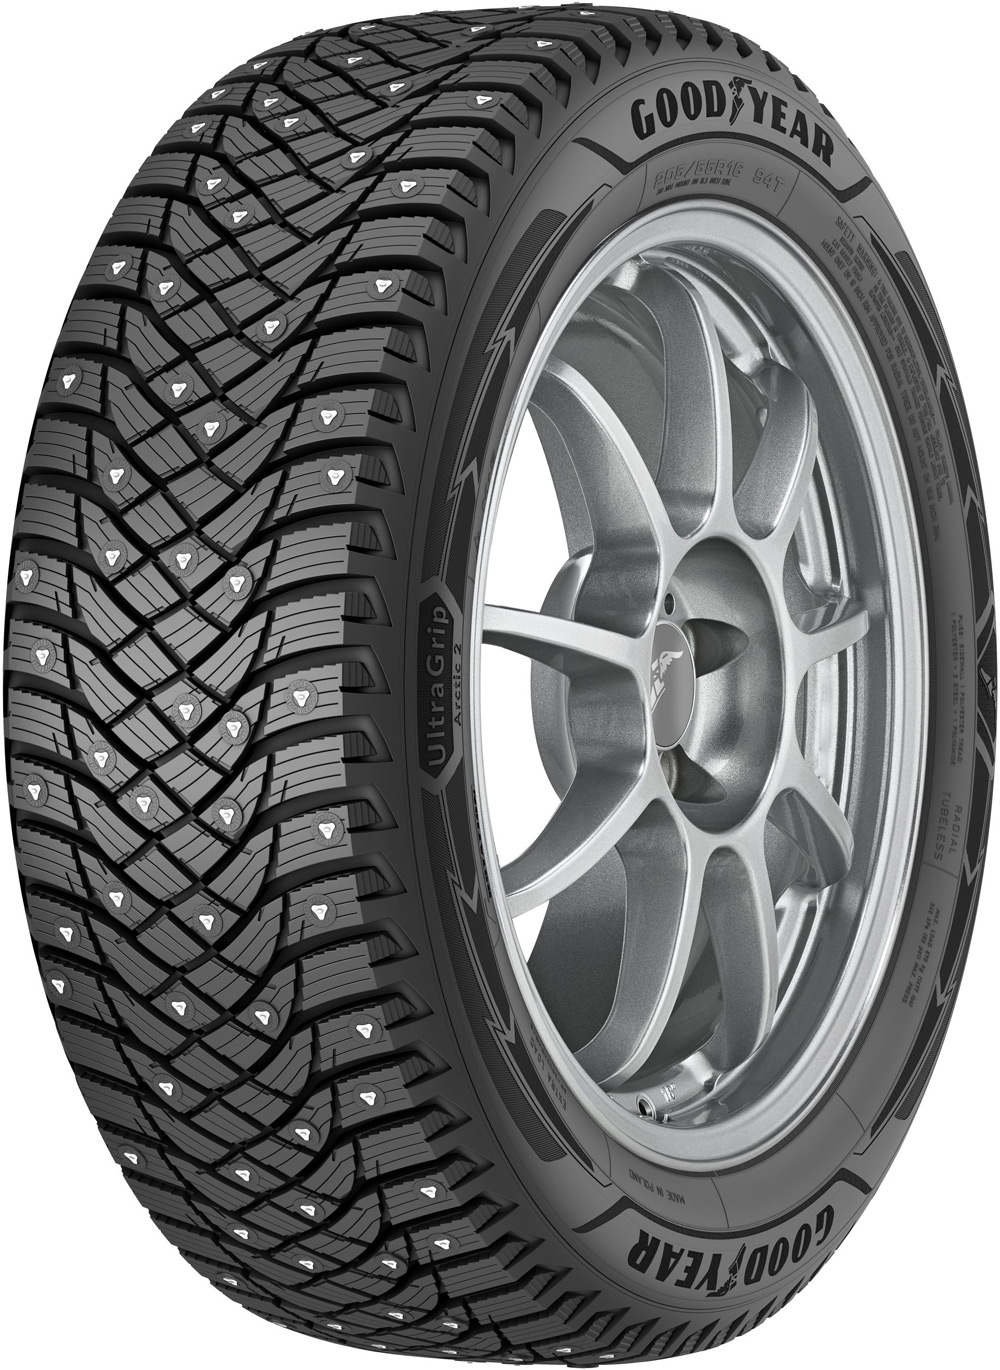 Anvelope auto GOODYEAR Ultra Grip Arctic 2 XL 225/50 R18 99T